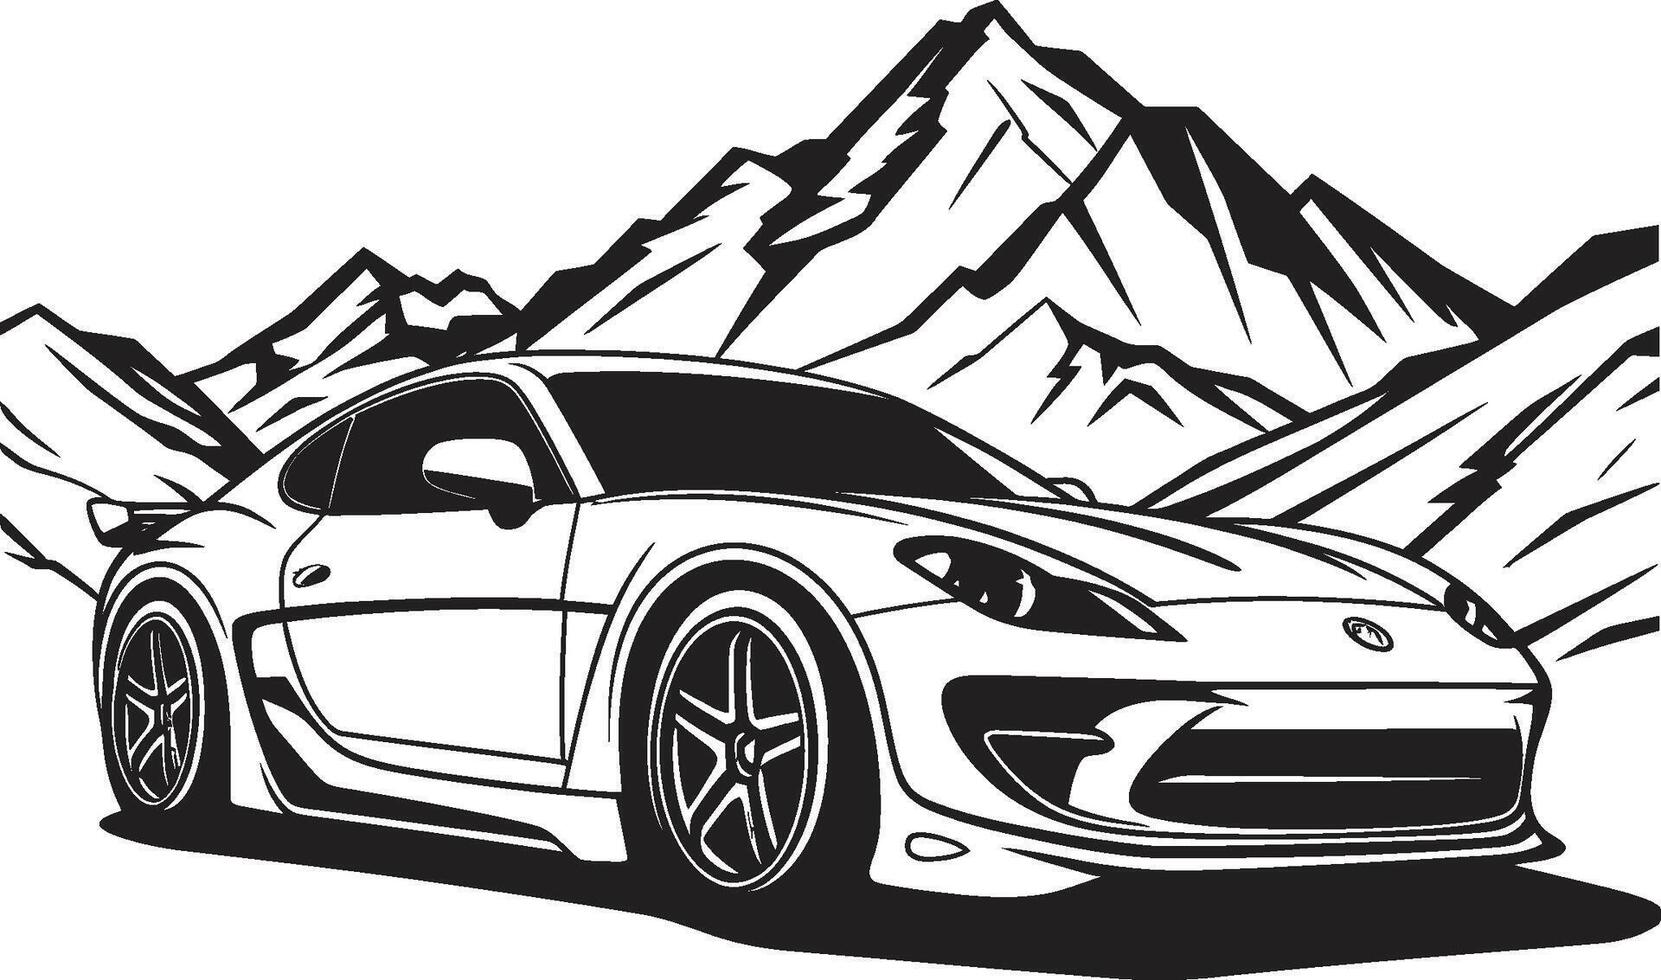 Elevated Velocity Dynamic Black Logo Design with a Mountainous Sports Car Icon Alpine Apex Iconic Vector Symbol of a Sports Car Navigating Mountain Roads in Black